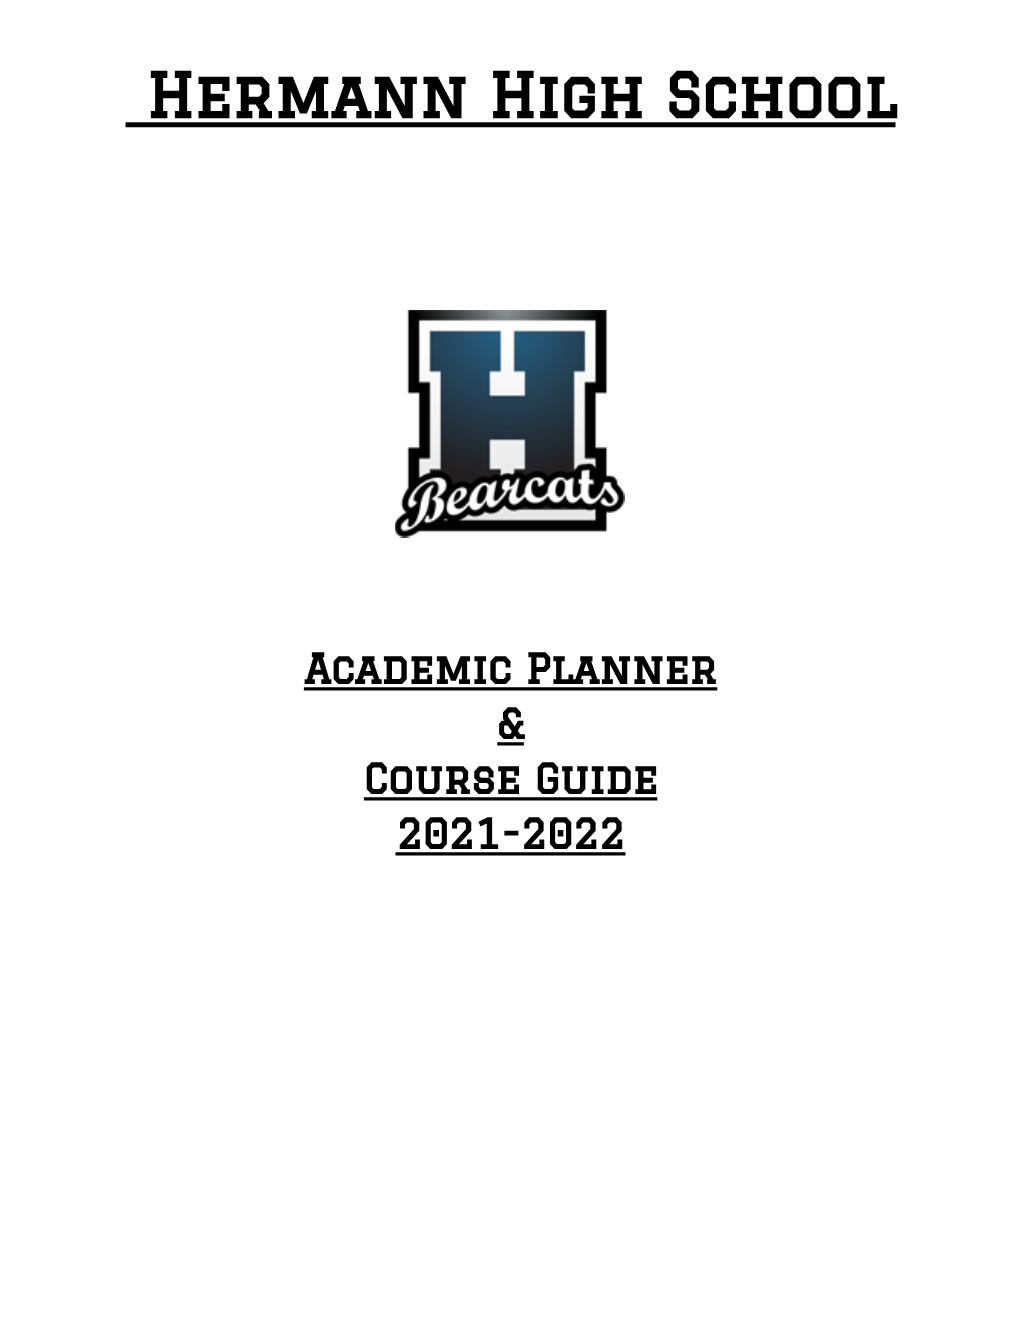 HHS Academic Planner and Course Guide 2021-2022